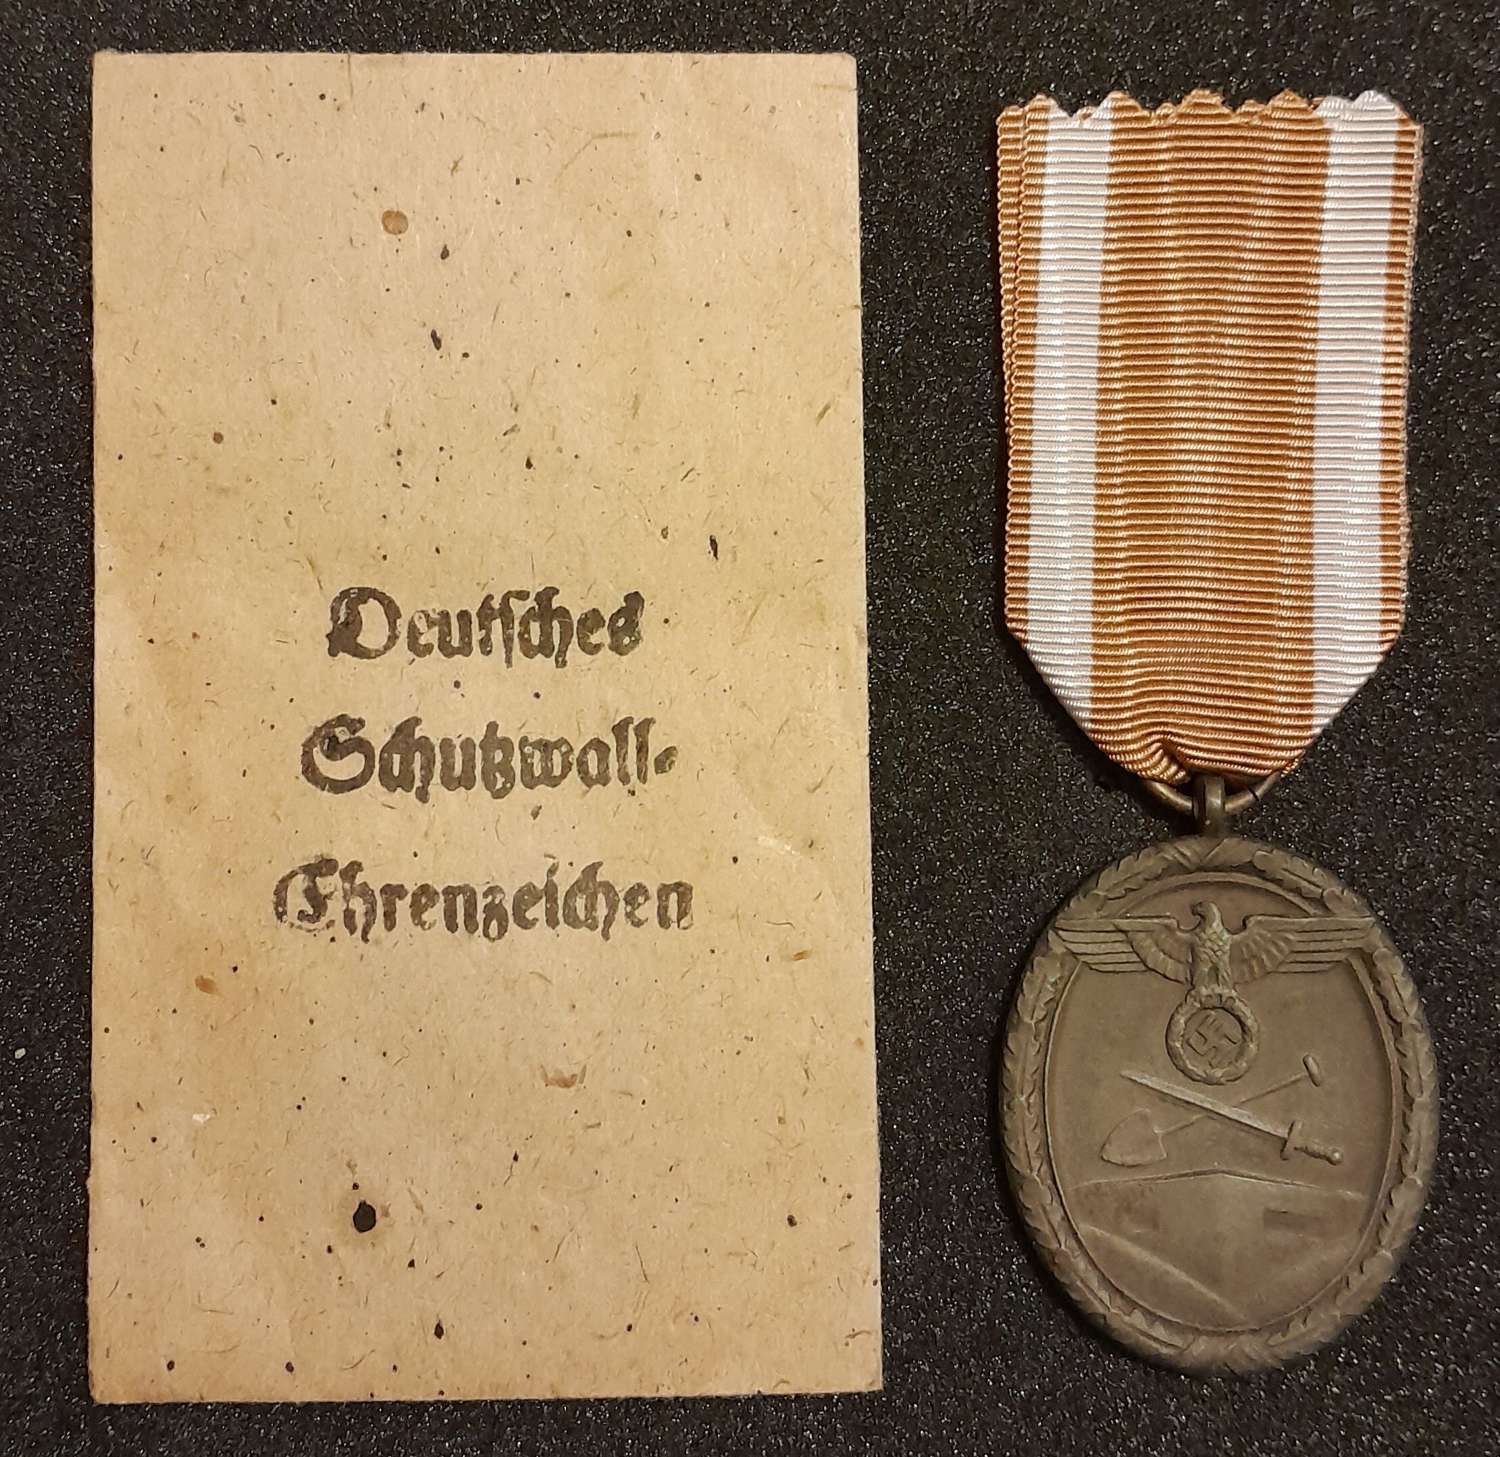 West Wall Medal and Packet